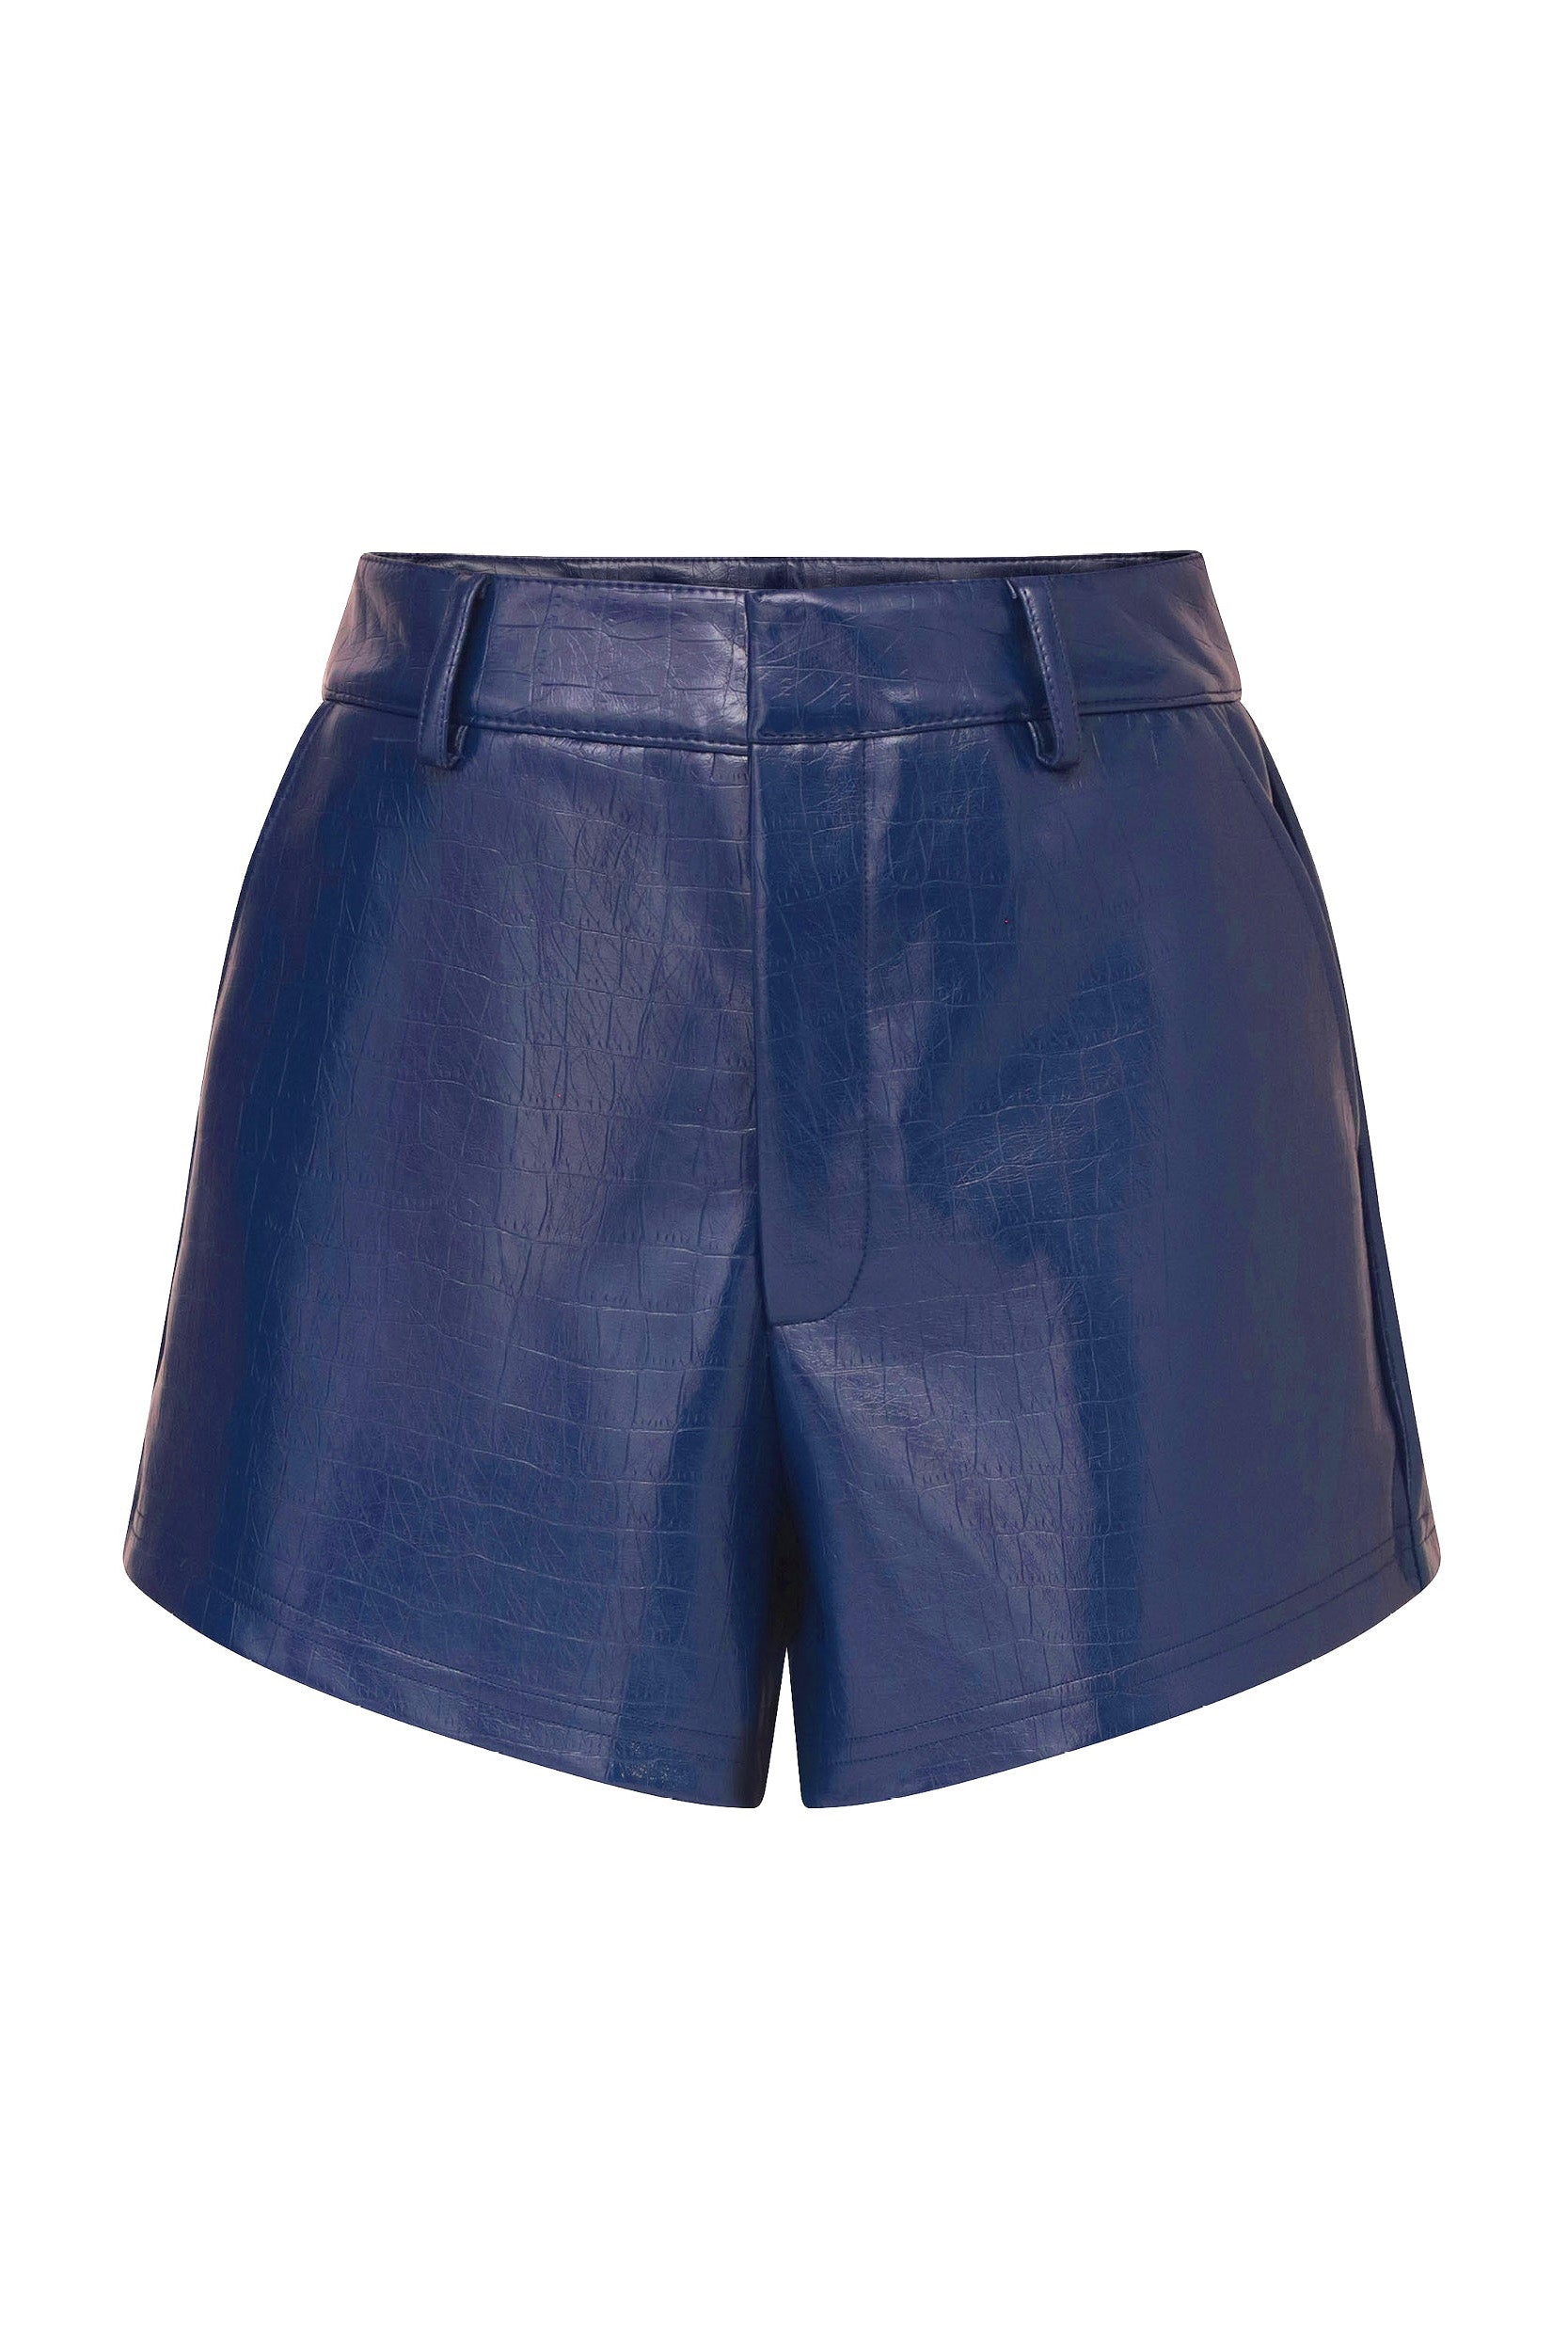 The Croco Faux Leather Short - Midnight Blue is a pair of high-waisted shorts with a slight sheen. These Spring shorts feature belt loops, side pockets, and have a subtle textured pattern for a flattering look.